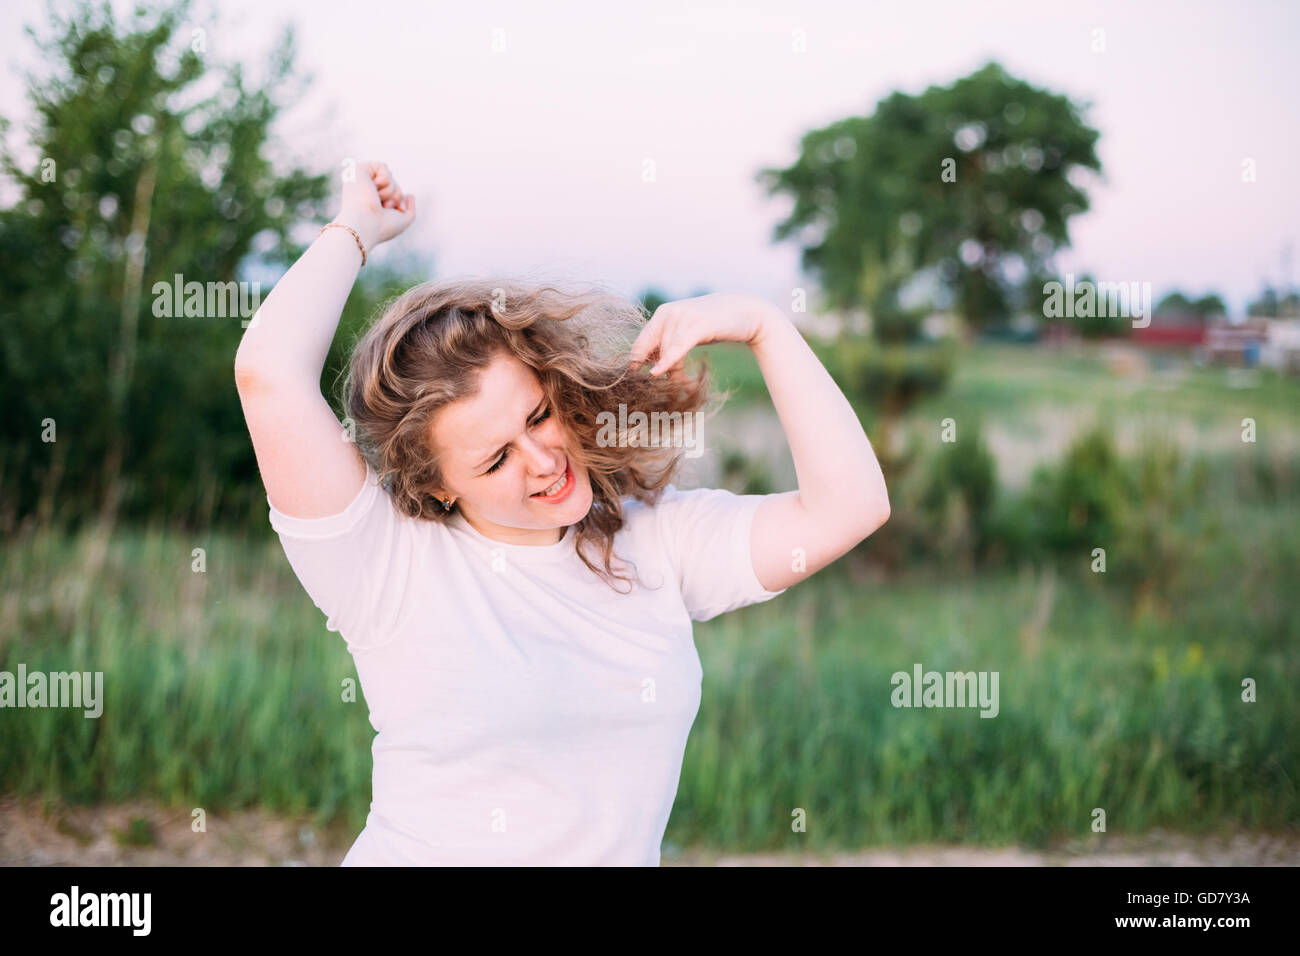 Portrait Of Funny Beautiful Plus Size Young Woman Girl In White Shirt Dancing In Summer Field Meadow. Spring, Outdoor Portrait Stock Photo